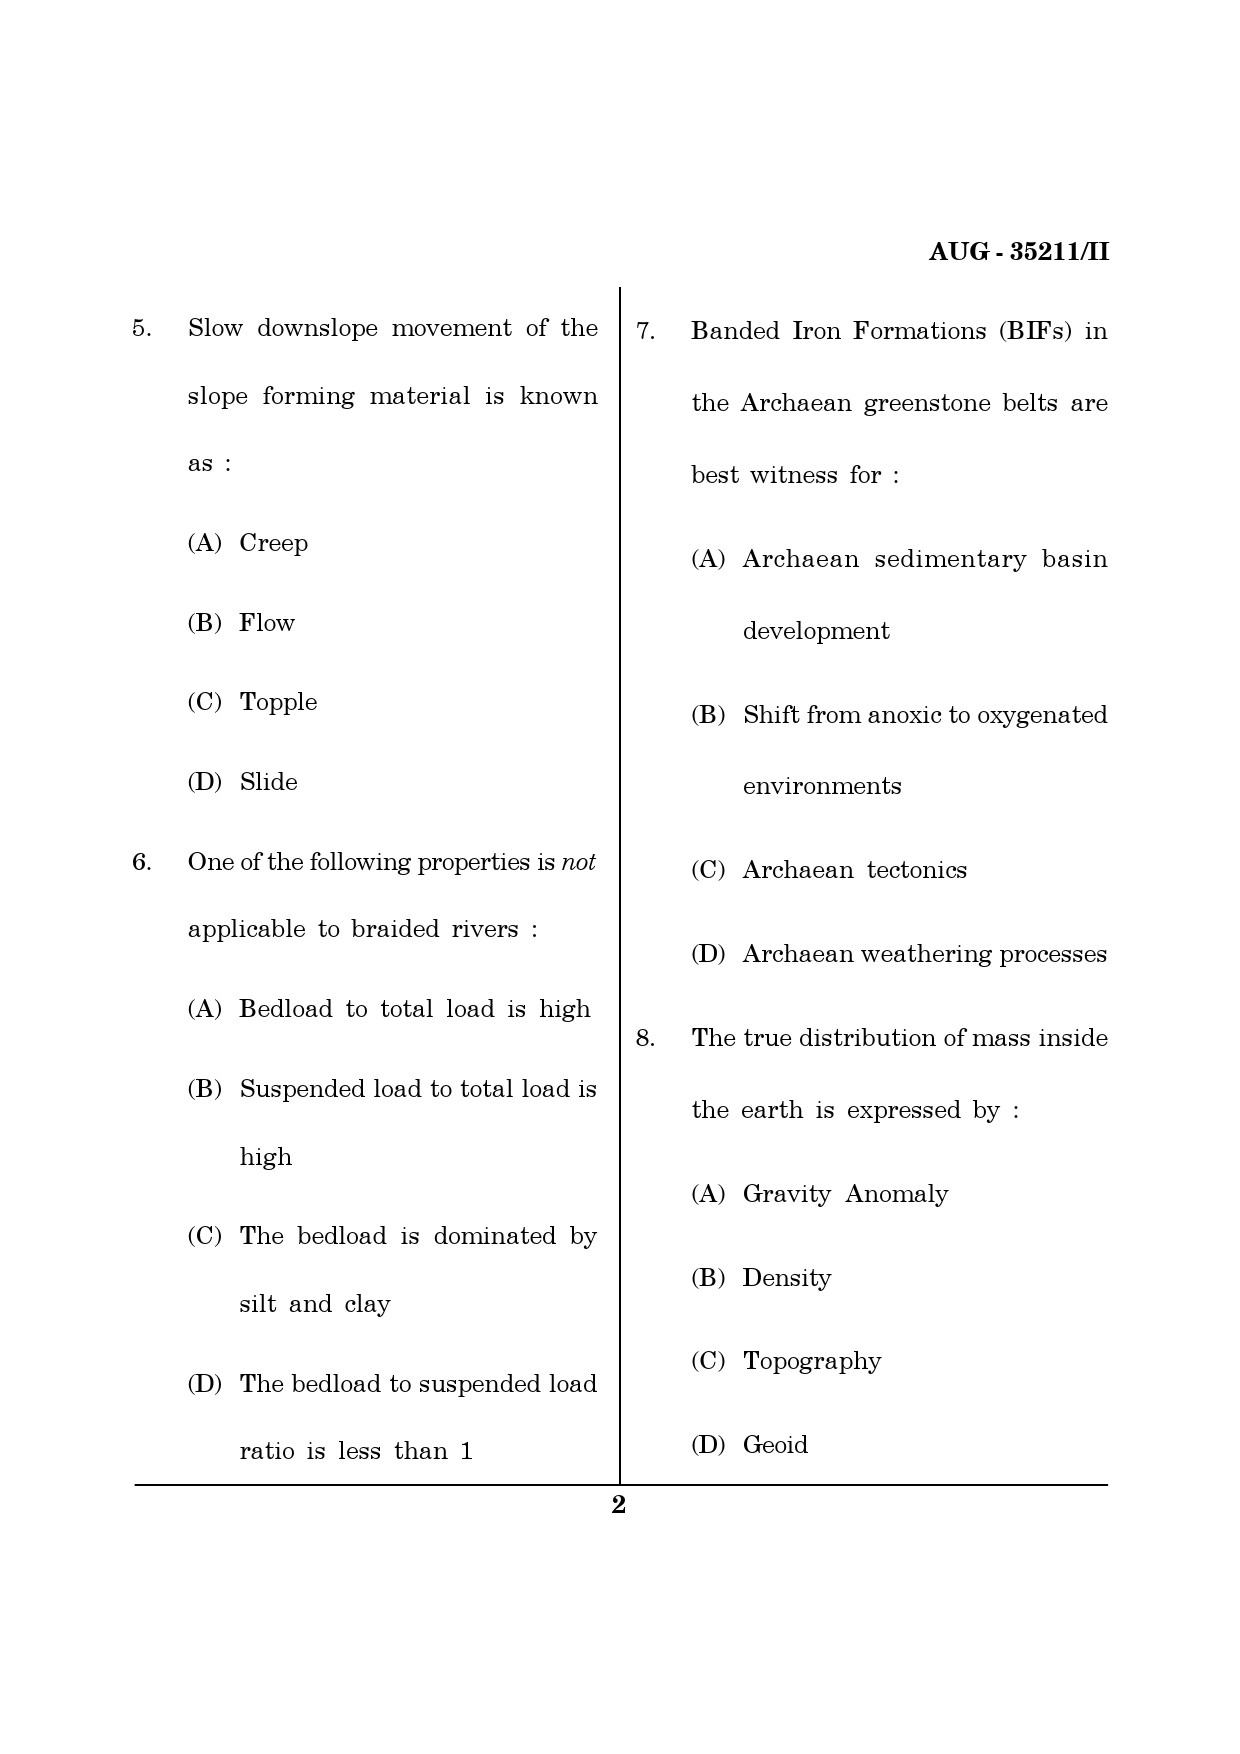 Maharashtra SET Earth Atmospheric Ocean Planetary Science Question Paper II August 2011 2